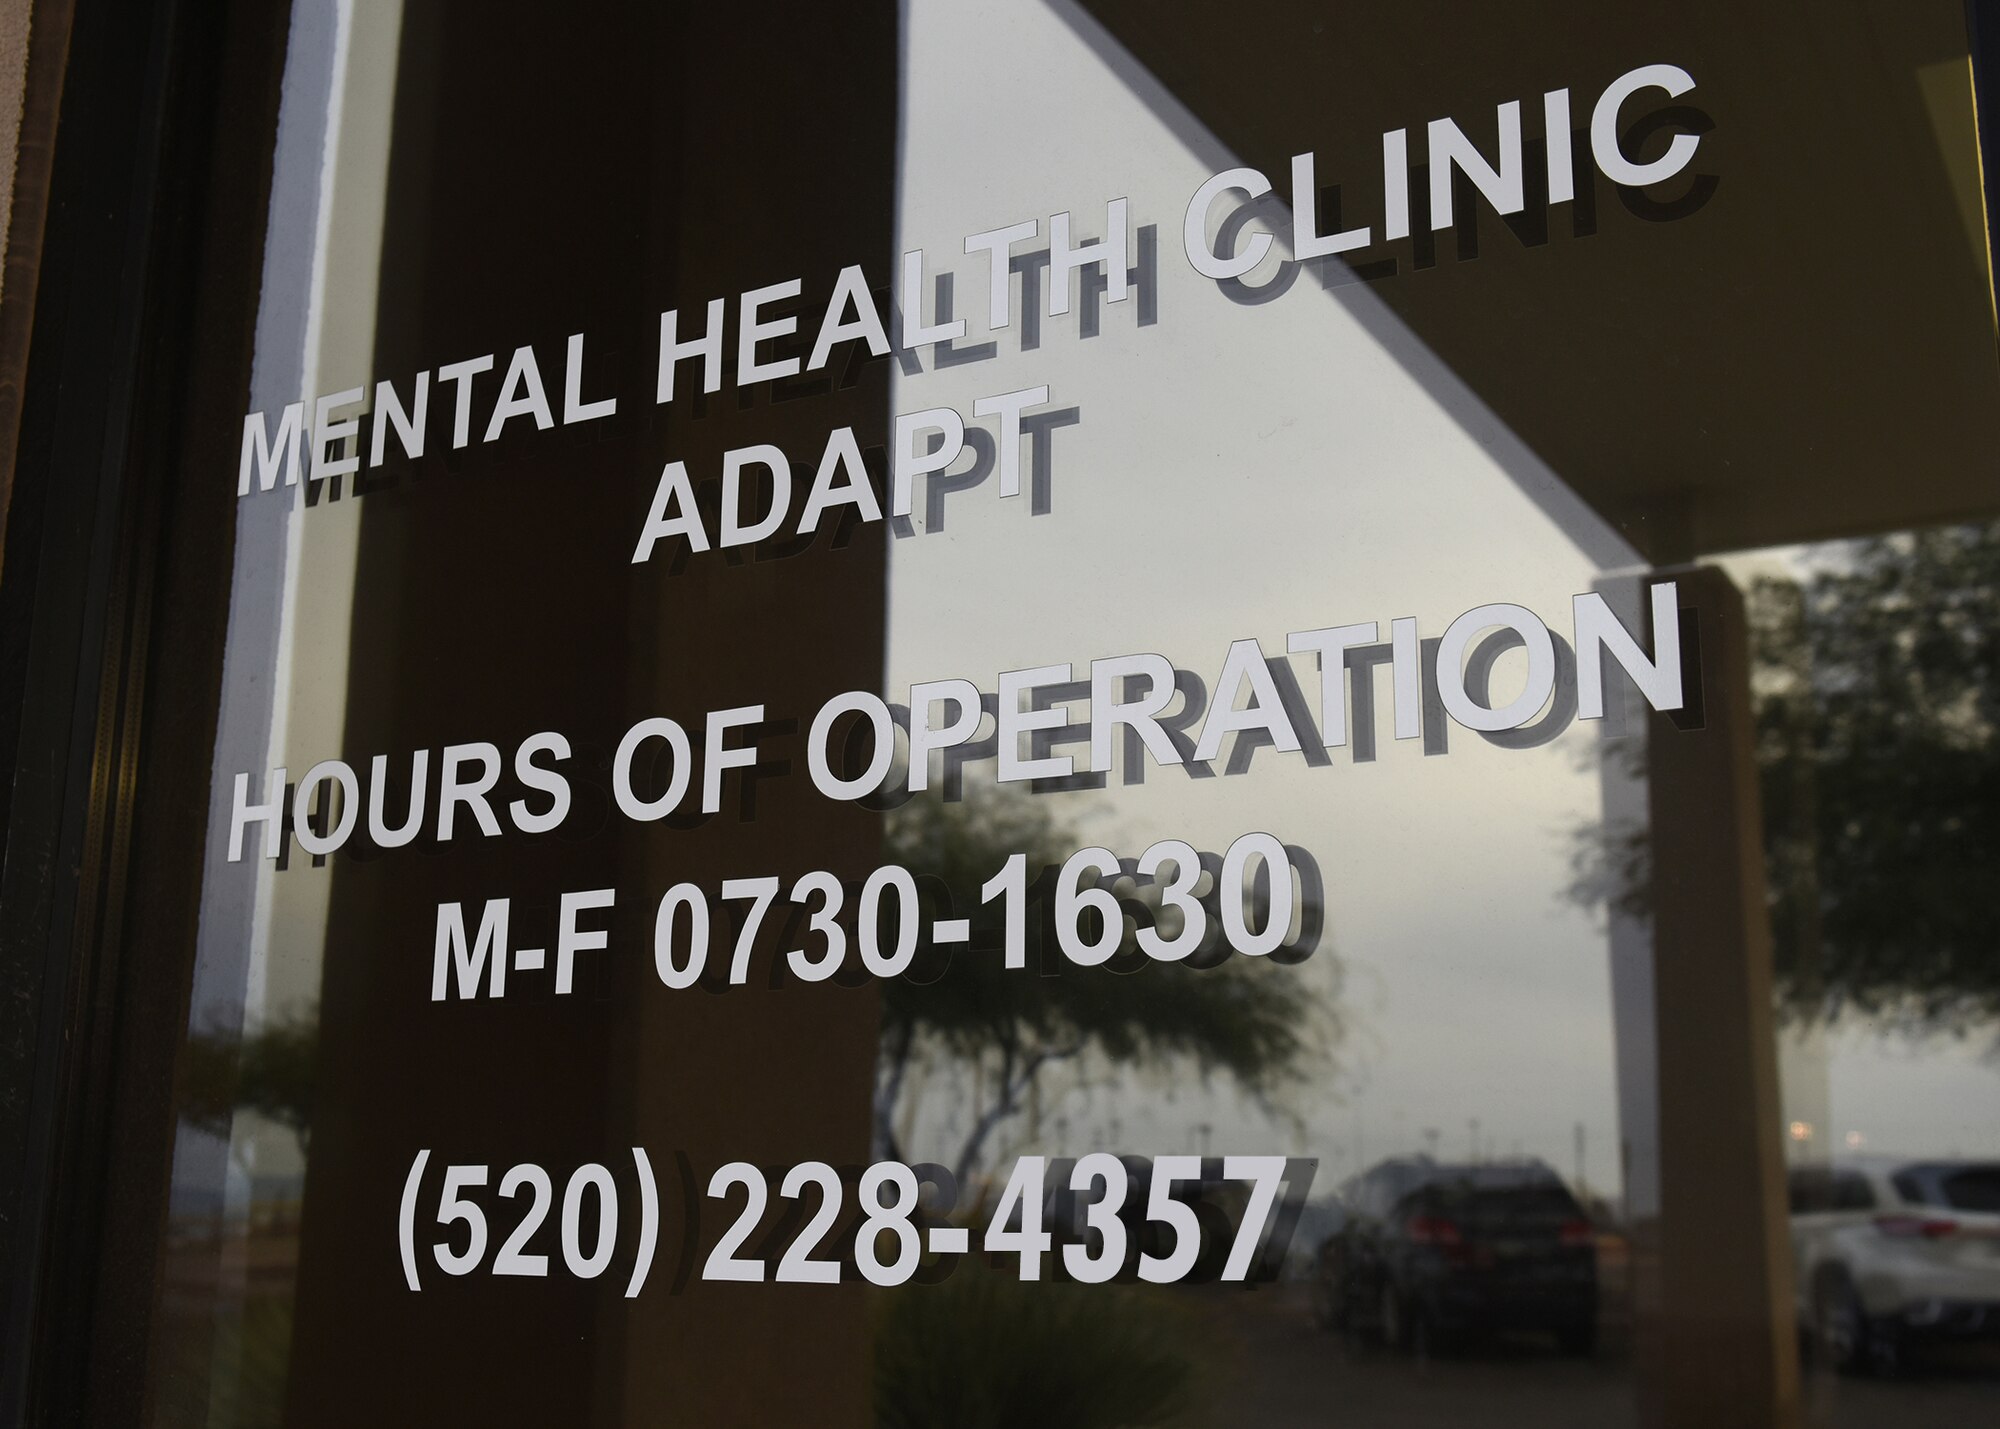 Hours of operation of a mental health clinic are displayed on building window